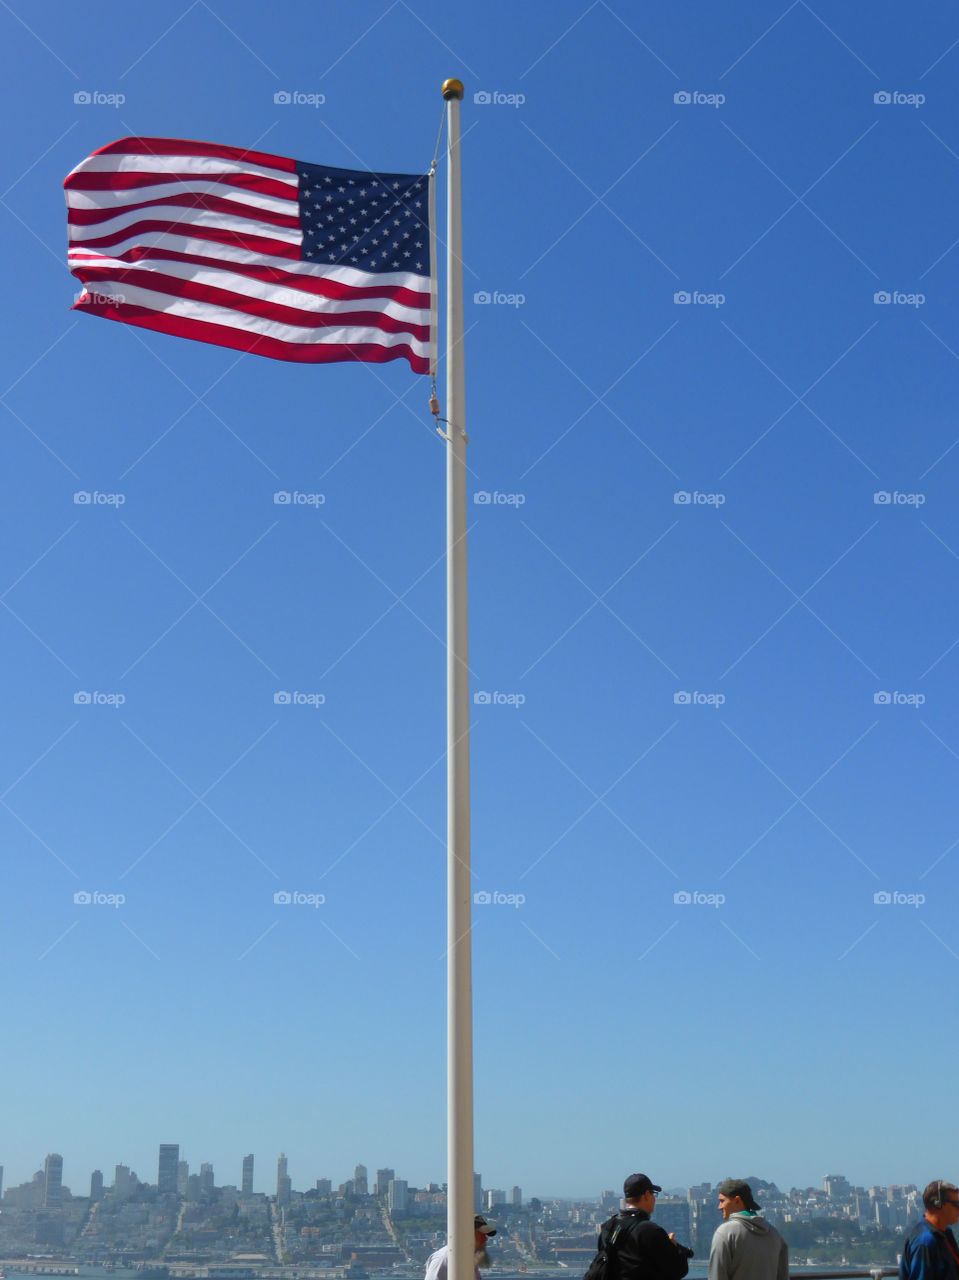 American flag. Flag pole. San Francisco.flag, usa, pole, blue, america, freedom, red, american, sky, california, symbol, patriotism, wind, united, country, white, independence, banner, states, july, day, francisco, san, national, landmark